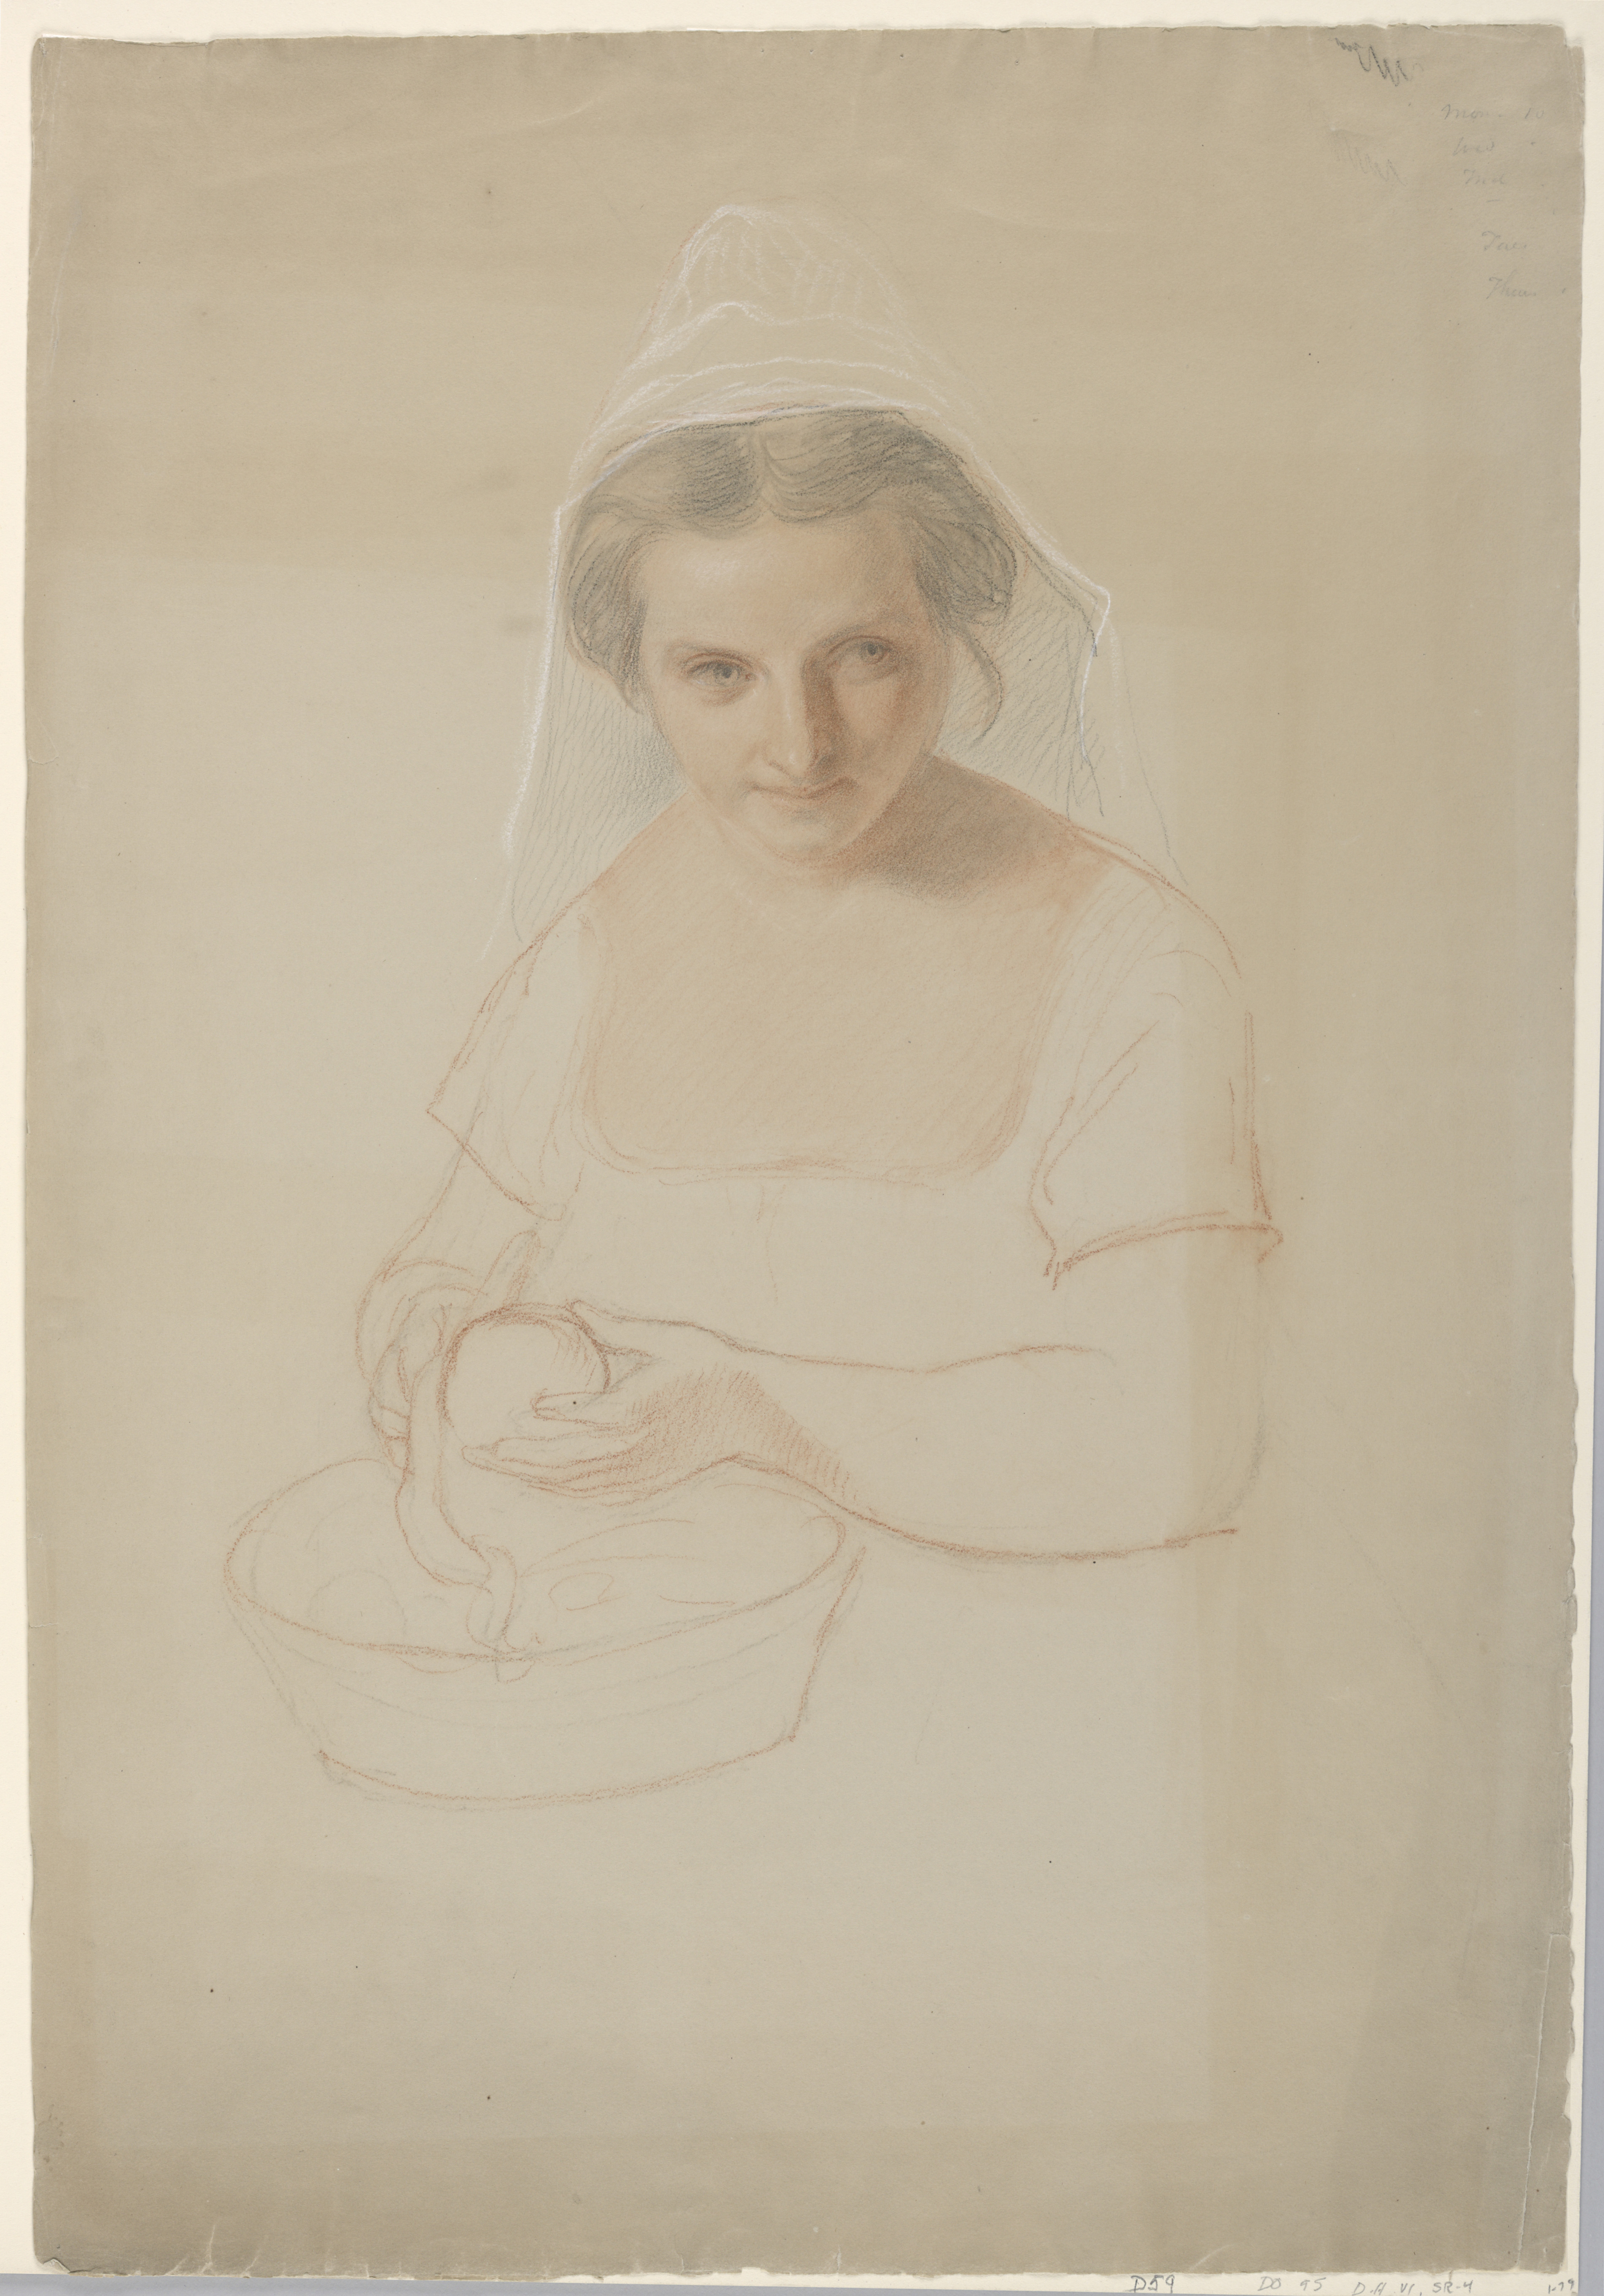 Image features a portrait of a woman peeling an apple, seen frontally, with a veil covering her hair. Please scroll down to read the blog post about this object.